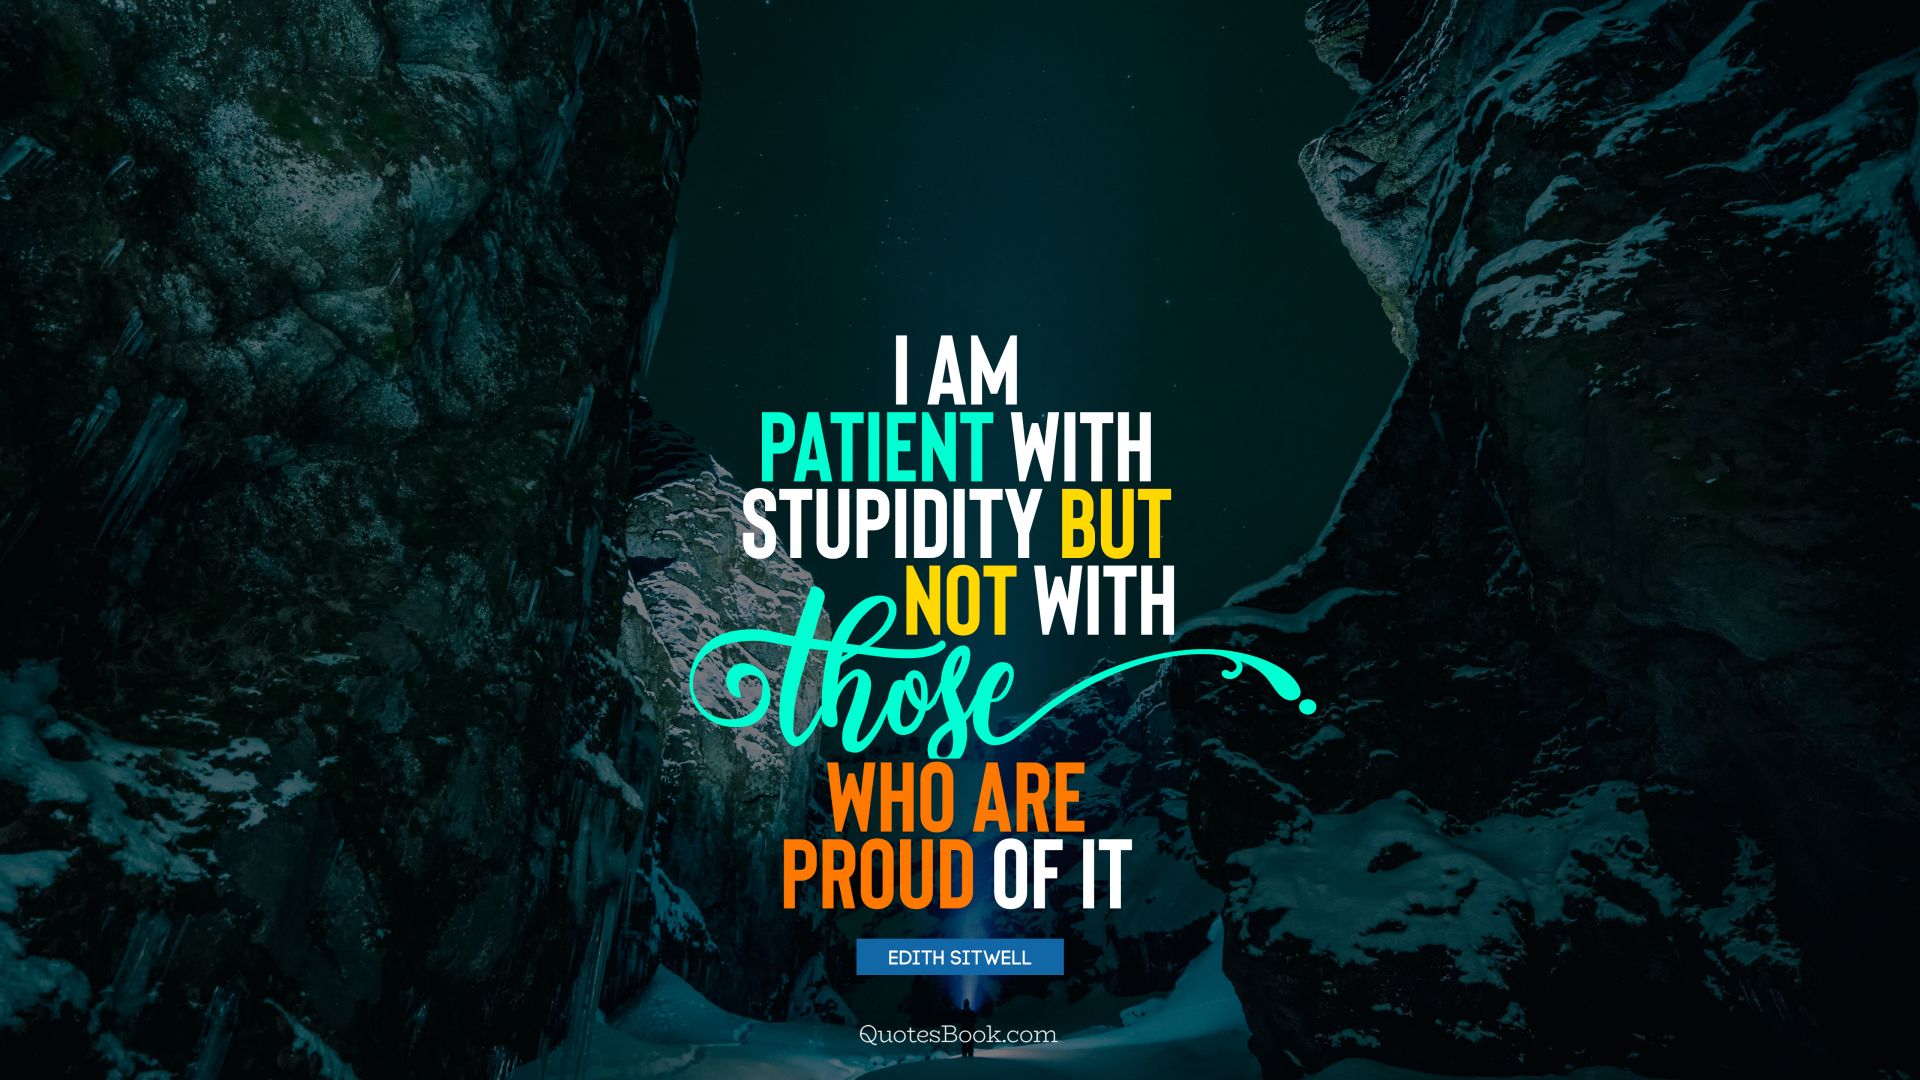 I am patient with stupidity but not with those who are proud of it. - Quote by Edith Sitwell